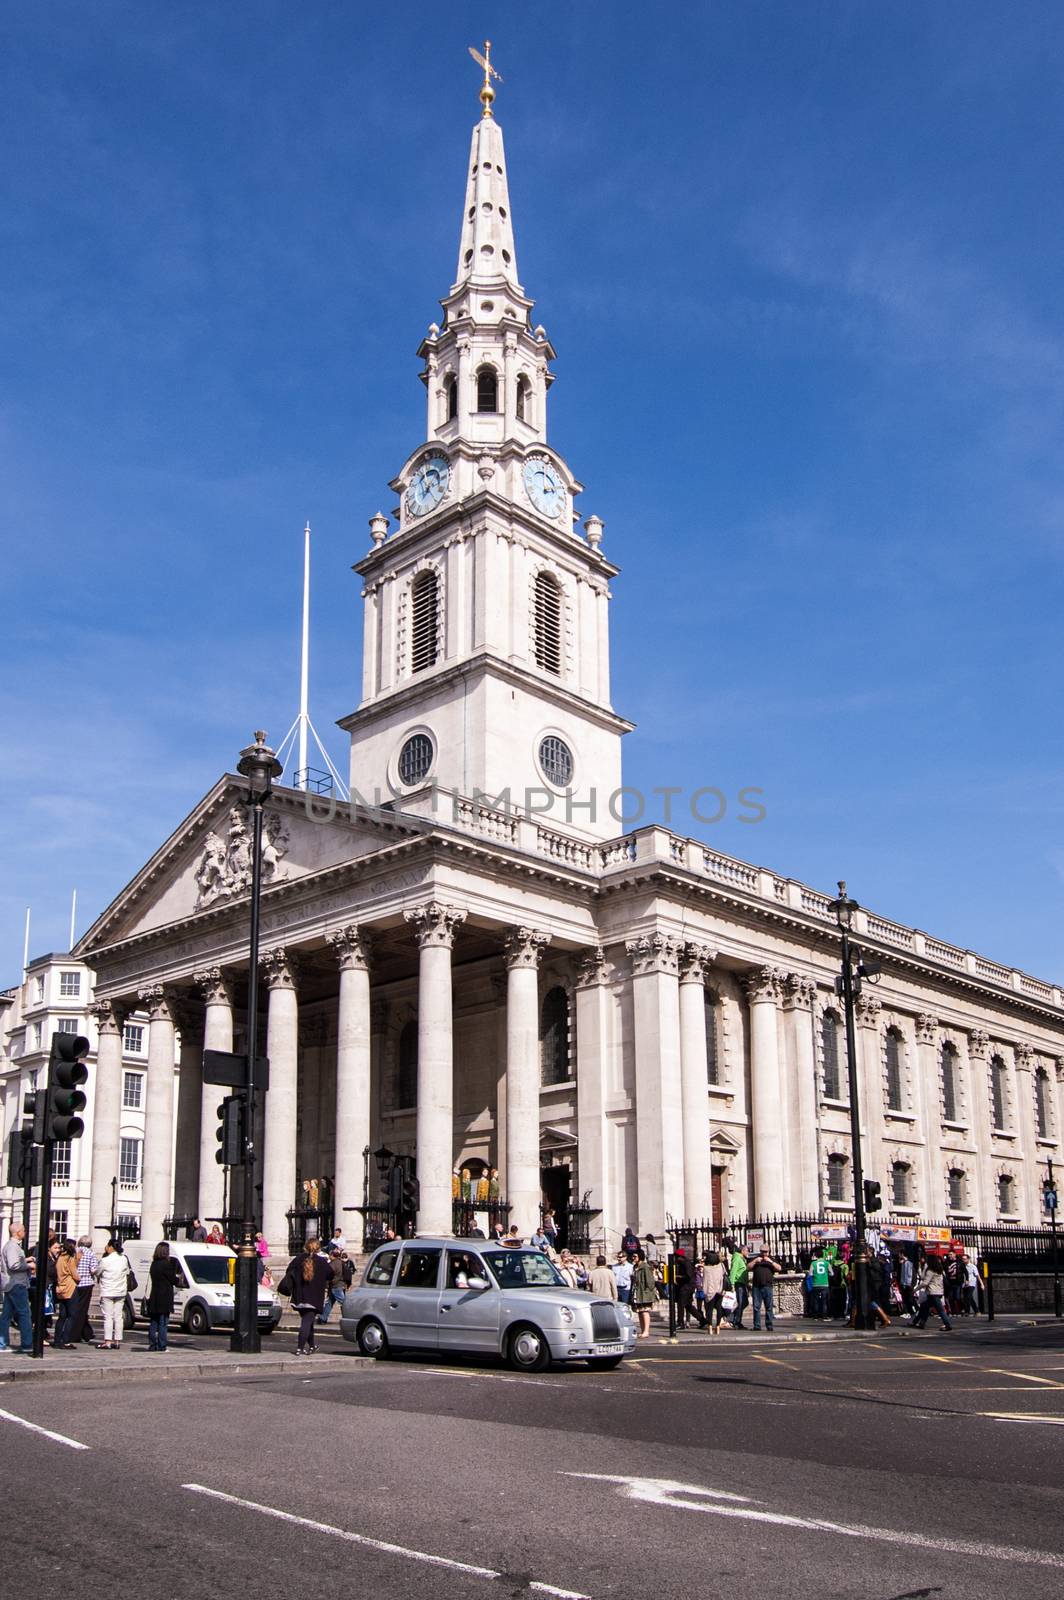 London, UK - March 25, 2012:  Traffic and pedestrians outside the landmark church of St Martin in the Fields in Trafalgar Square, London on a sunny spring afternoon.